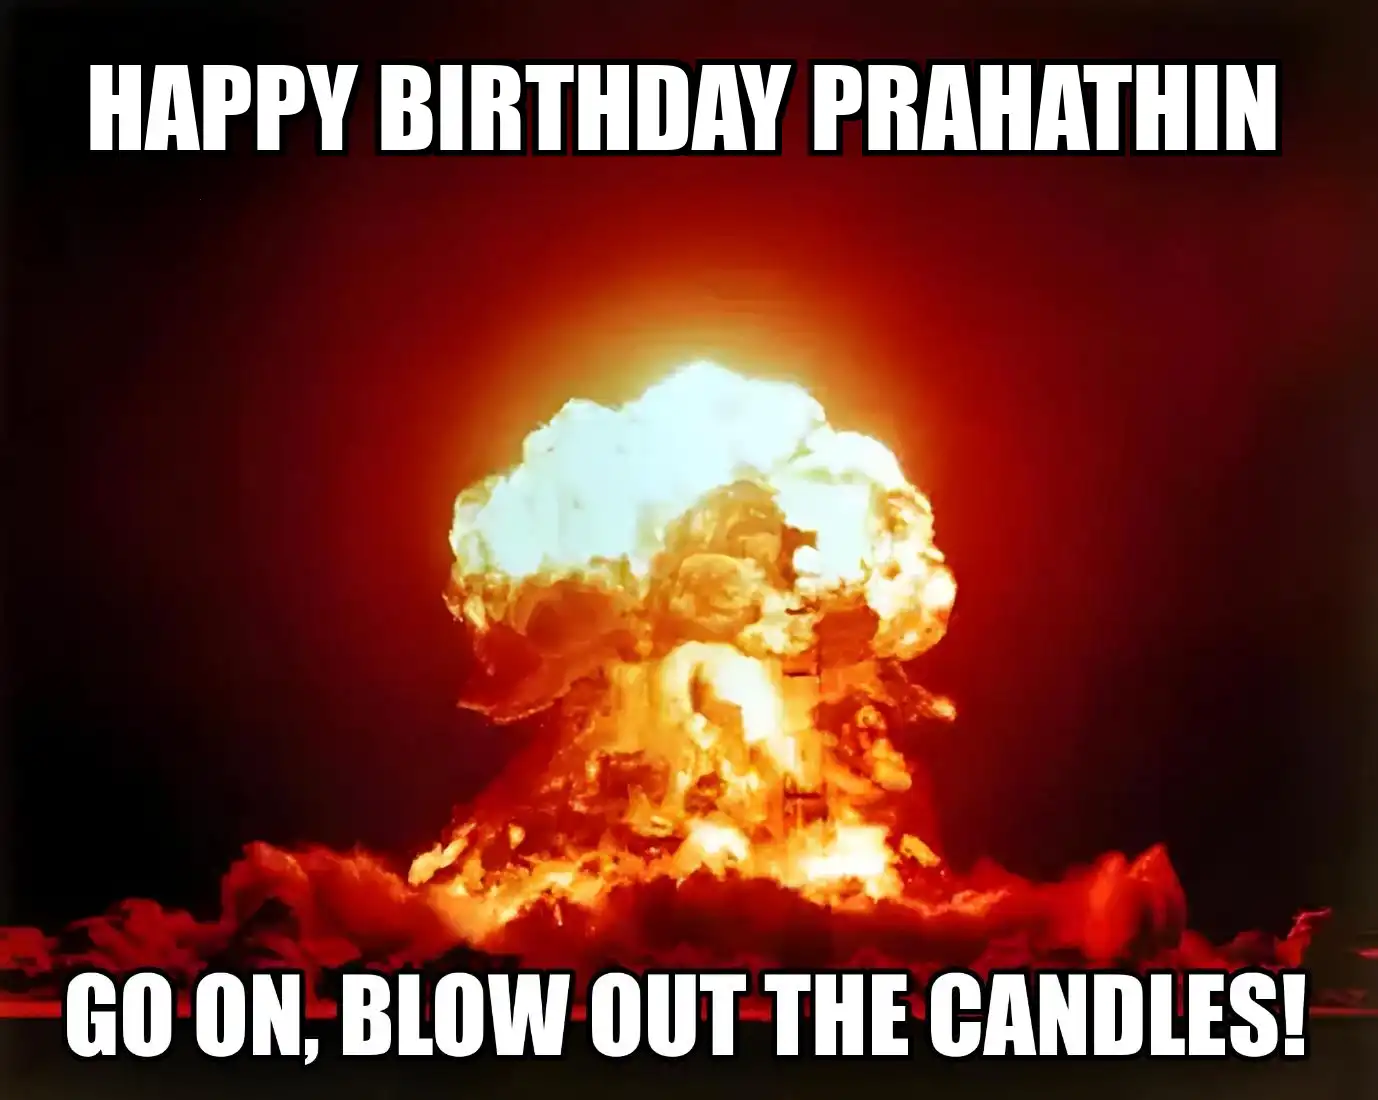 Happy Birthday Prahathin Go On Blow Out The Candles Meme